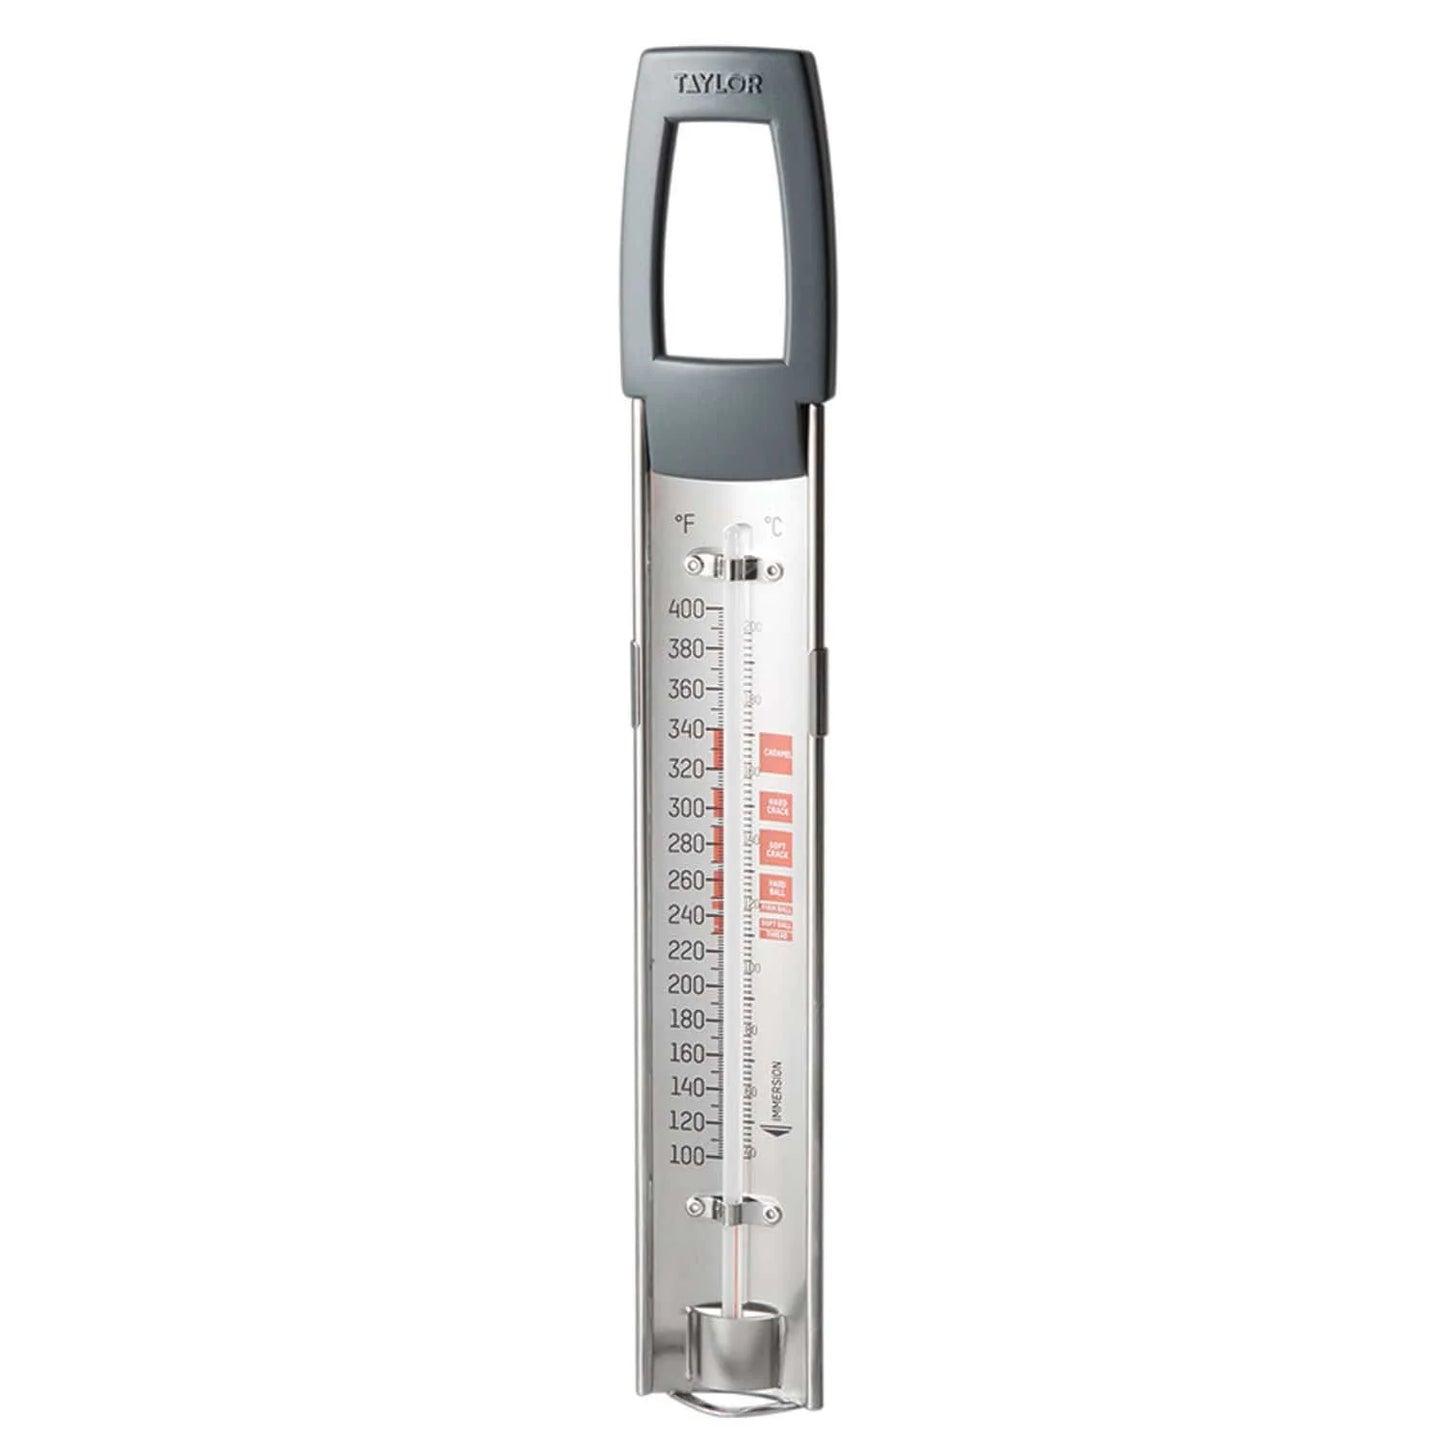 Taylor Curved Candy/Deep Fry Paddle Thermometer